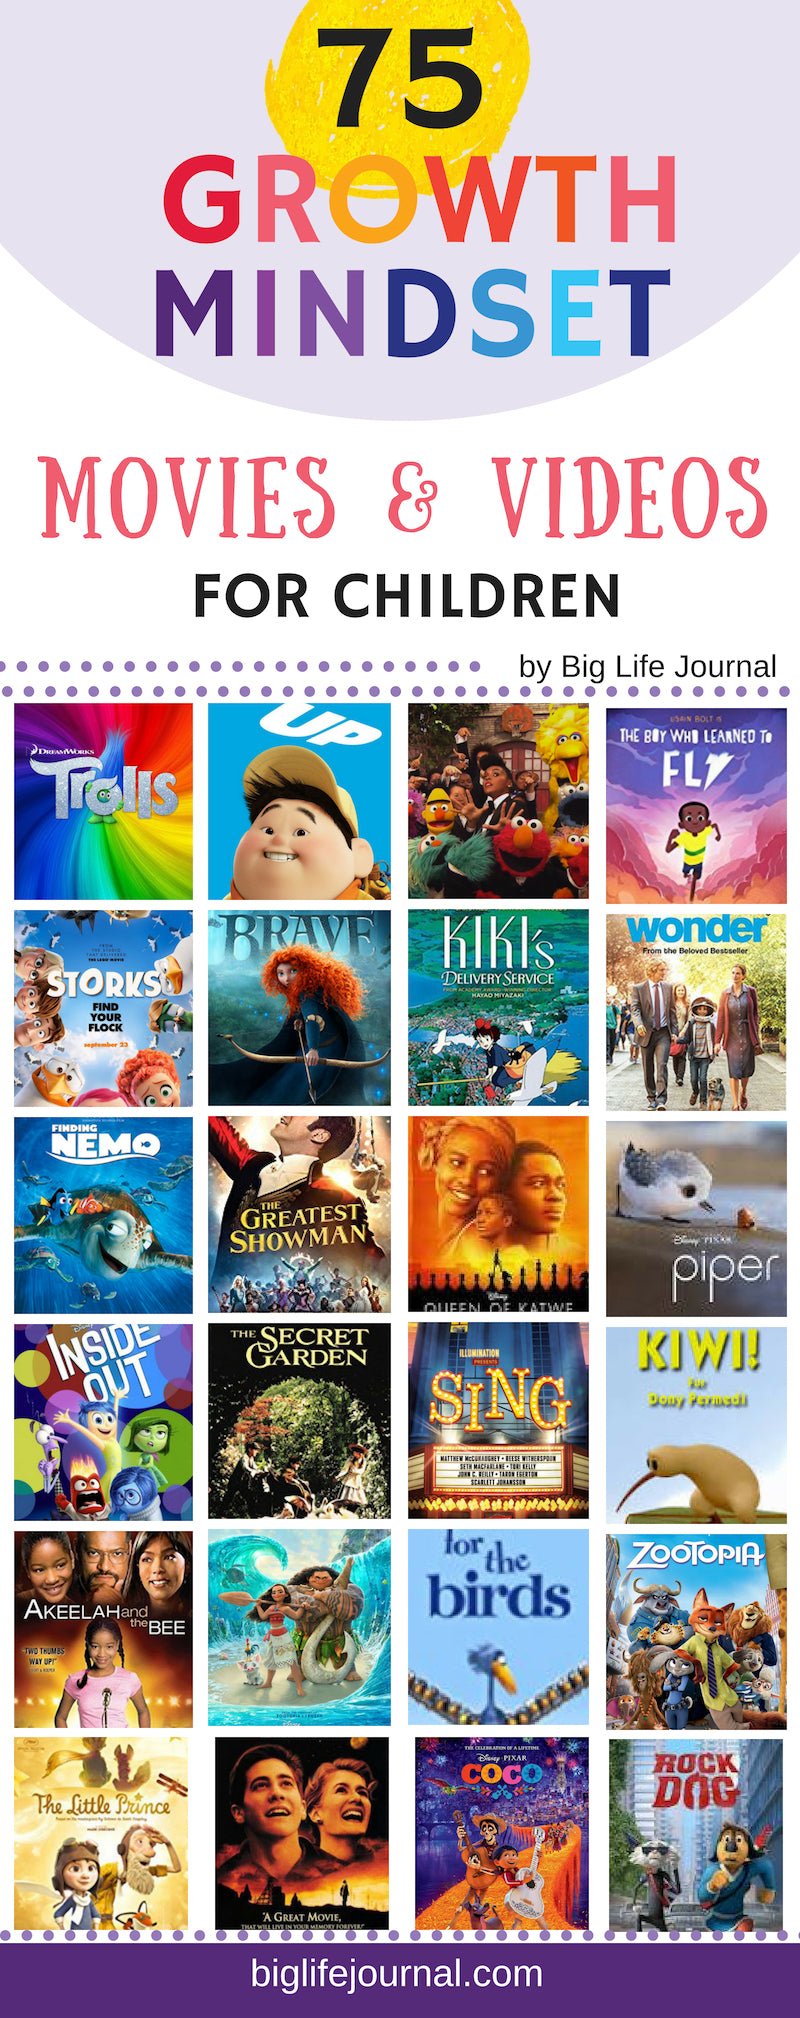 Top 75 Growth Mindset Movies for Children - Big Life Journal